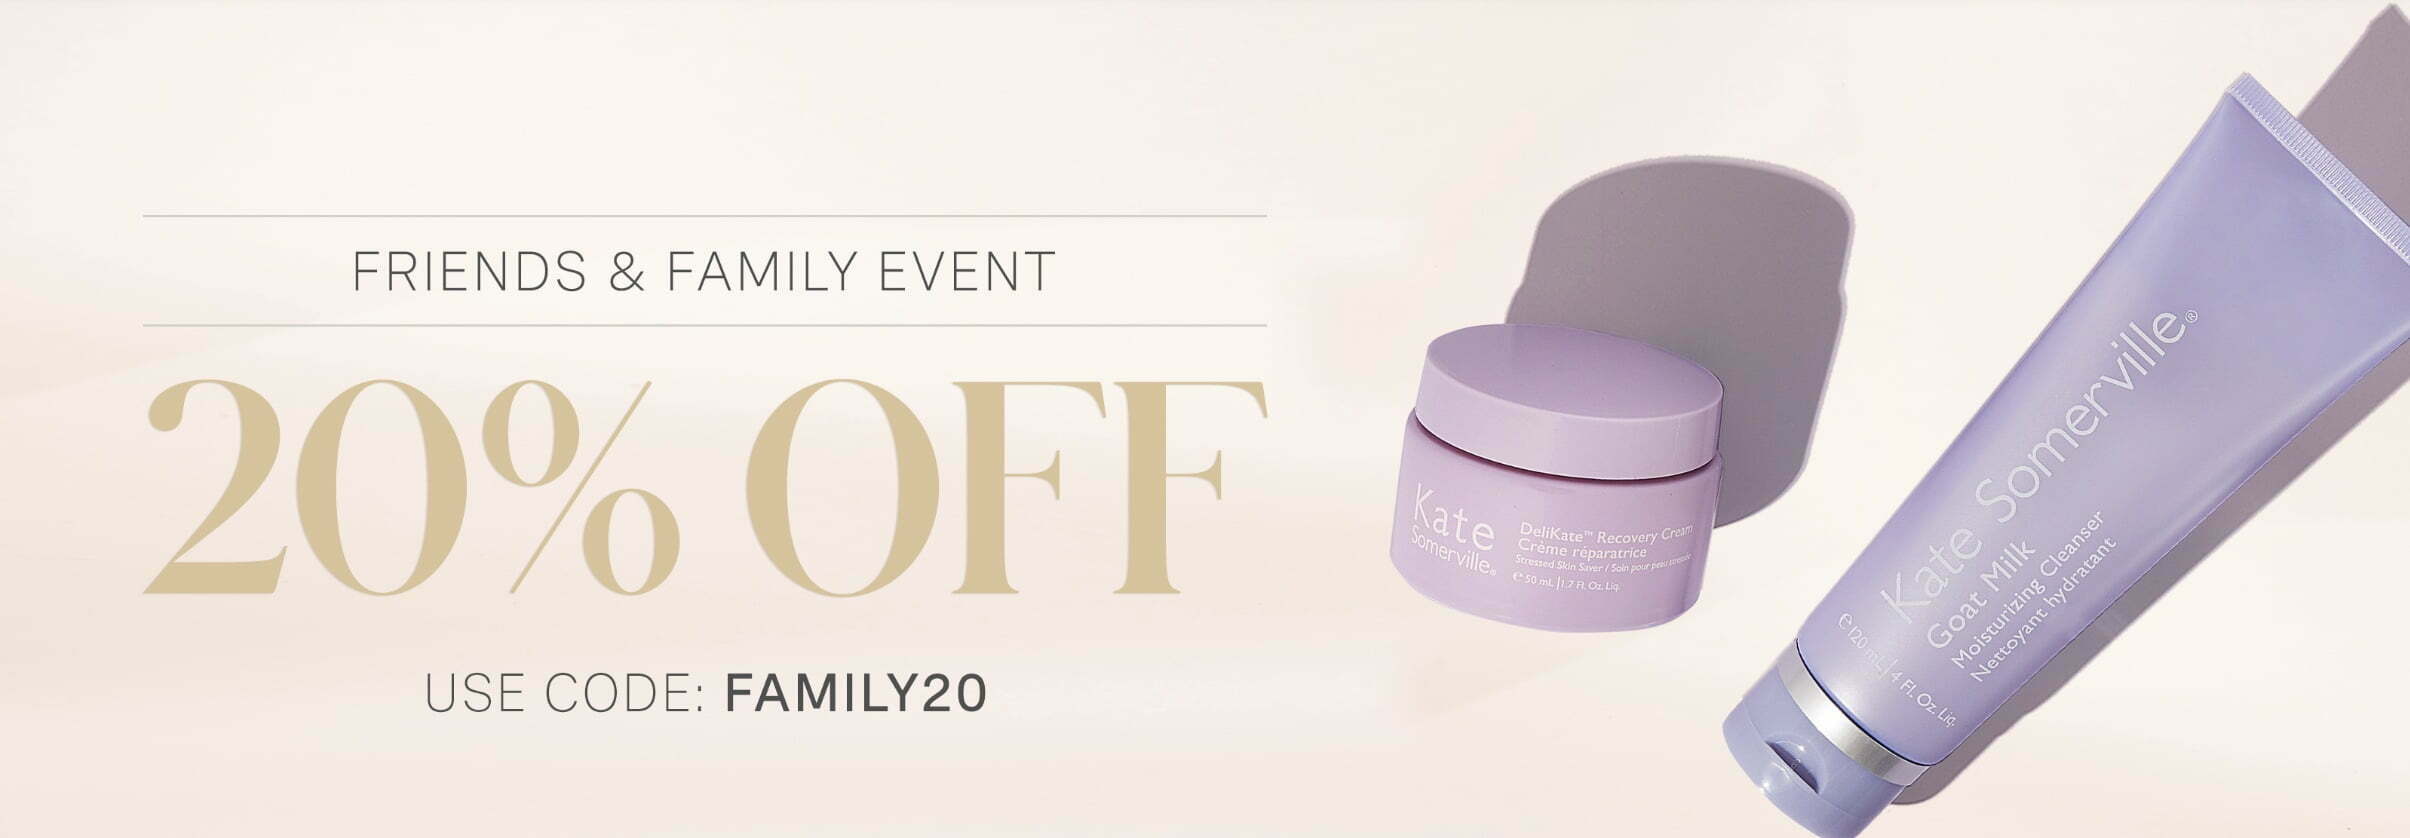 Kate Somerville Friends & Family Event